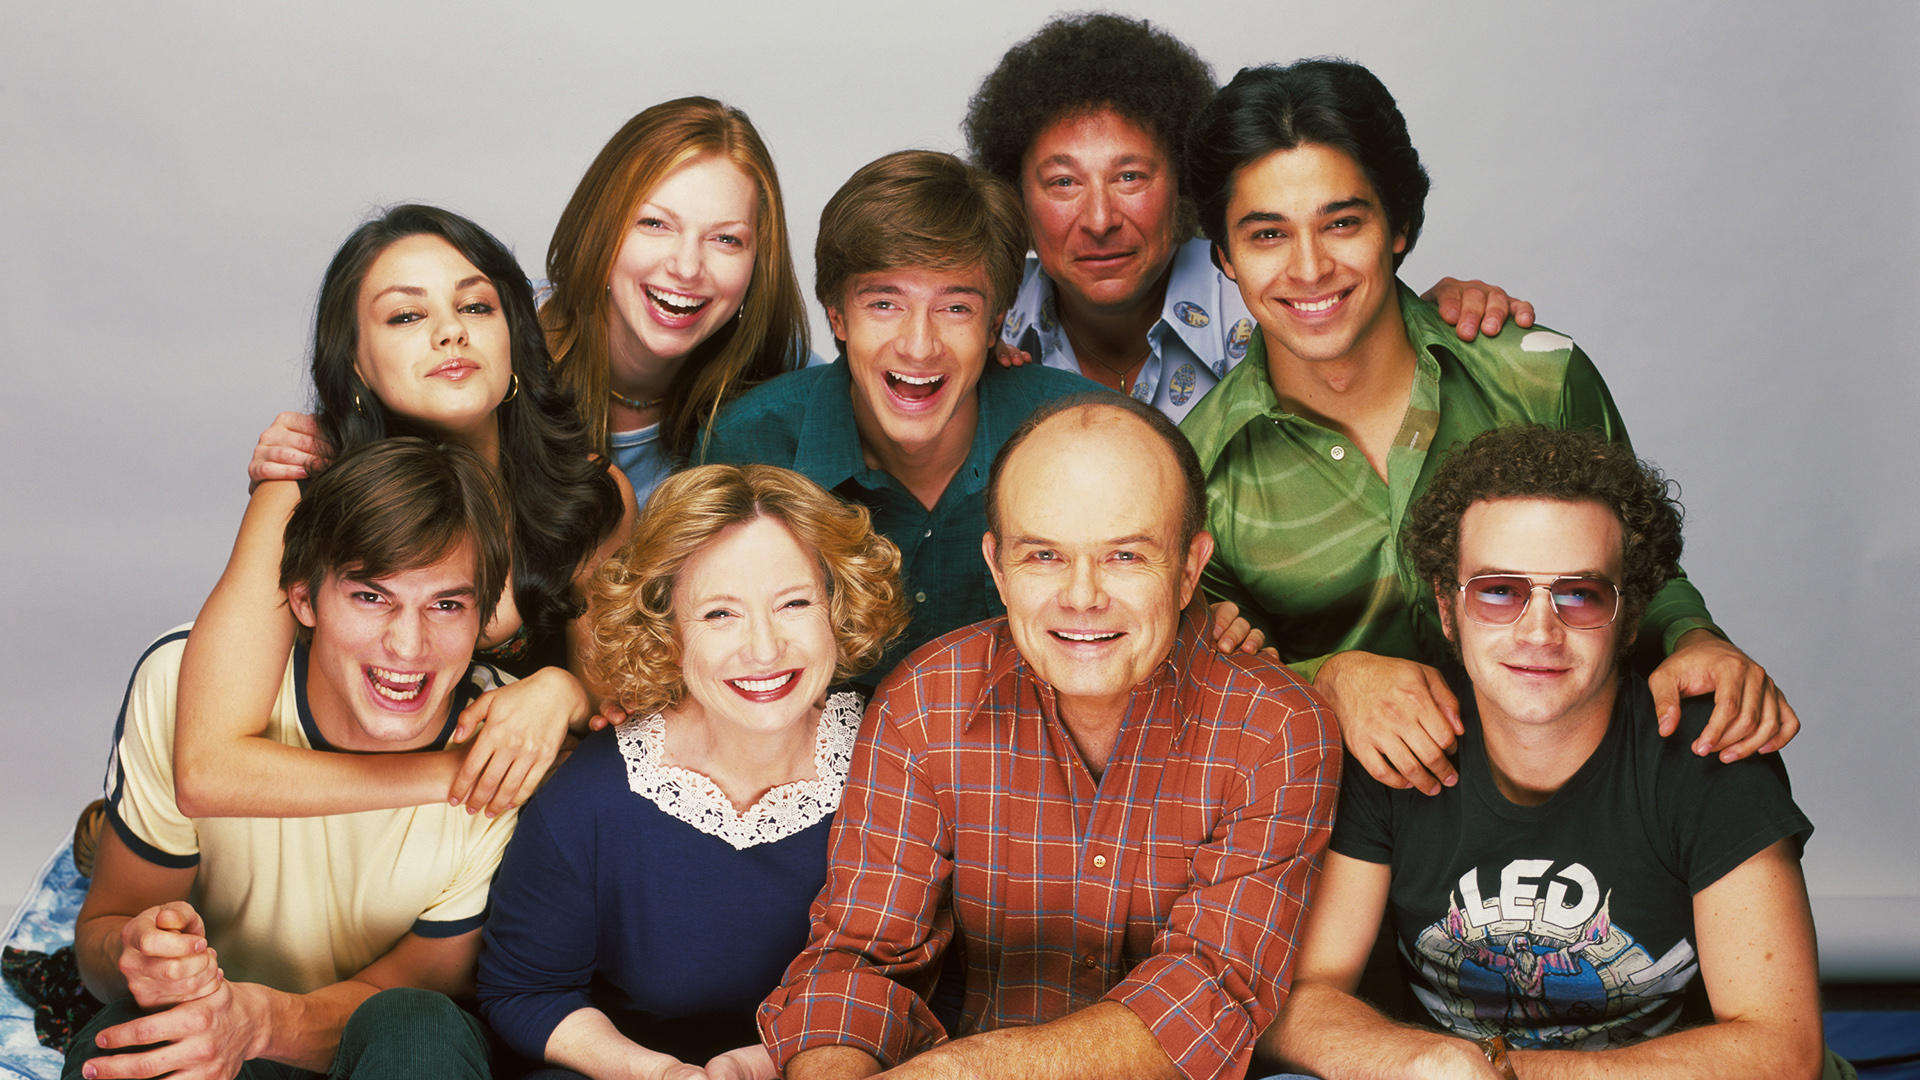 TV Show That '70s Show HD Wallpaper Background Image. 